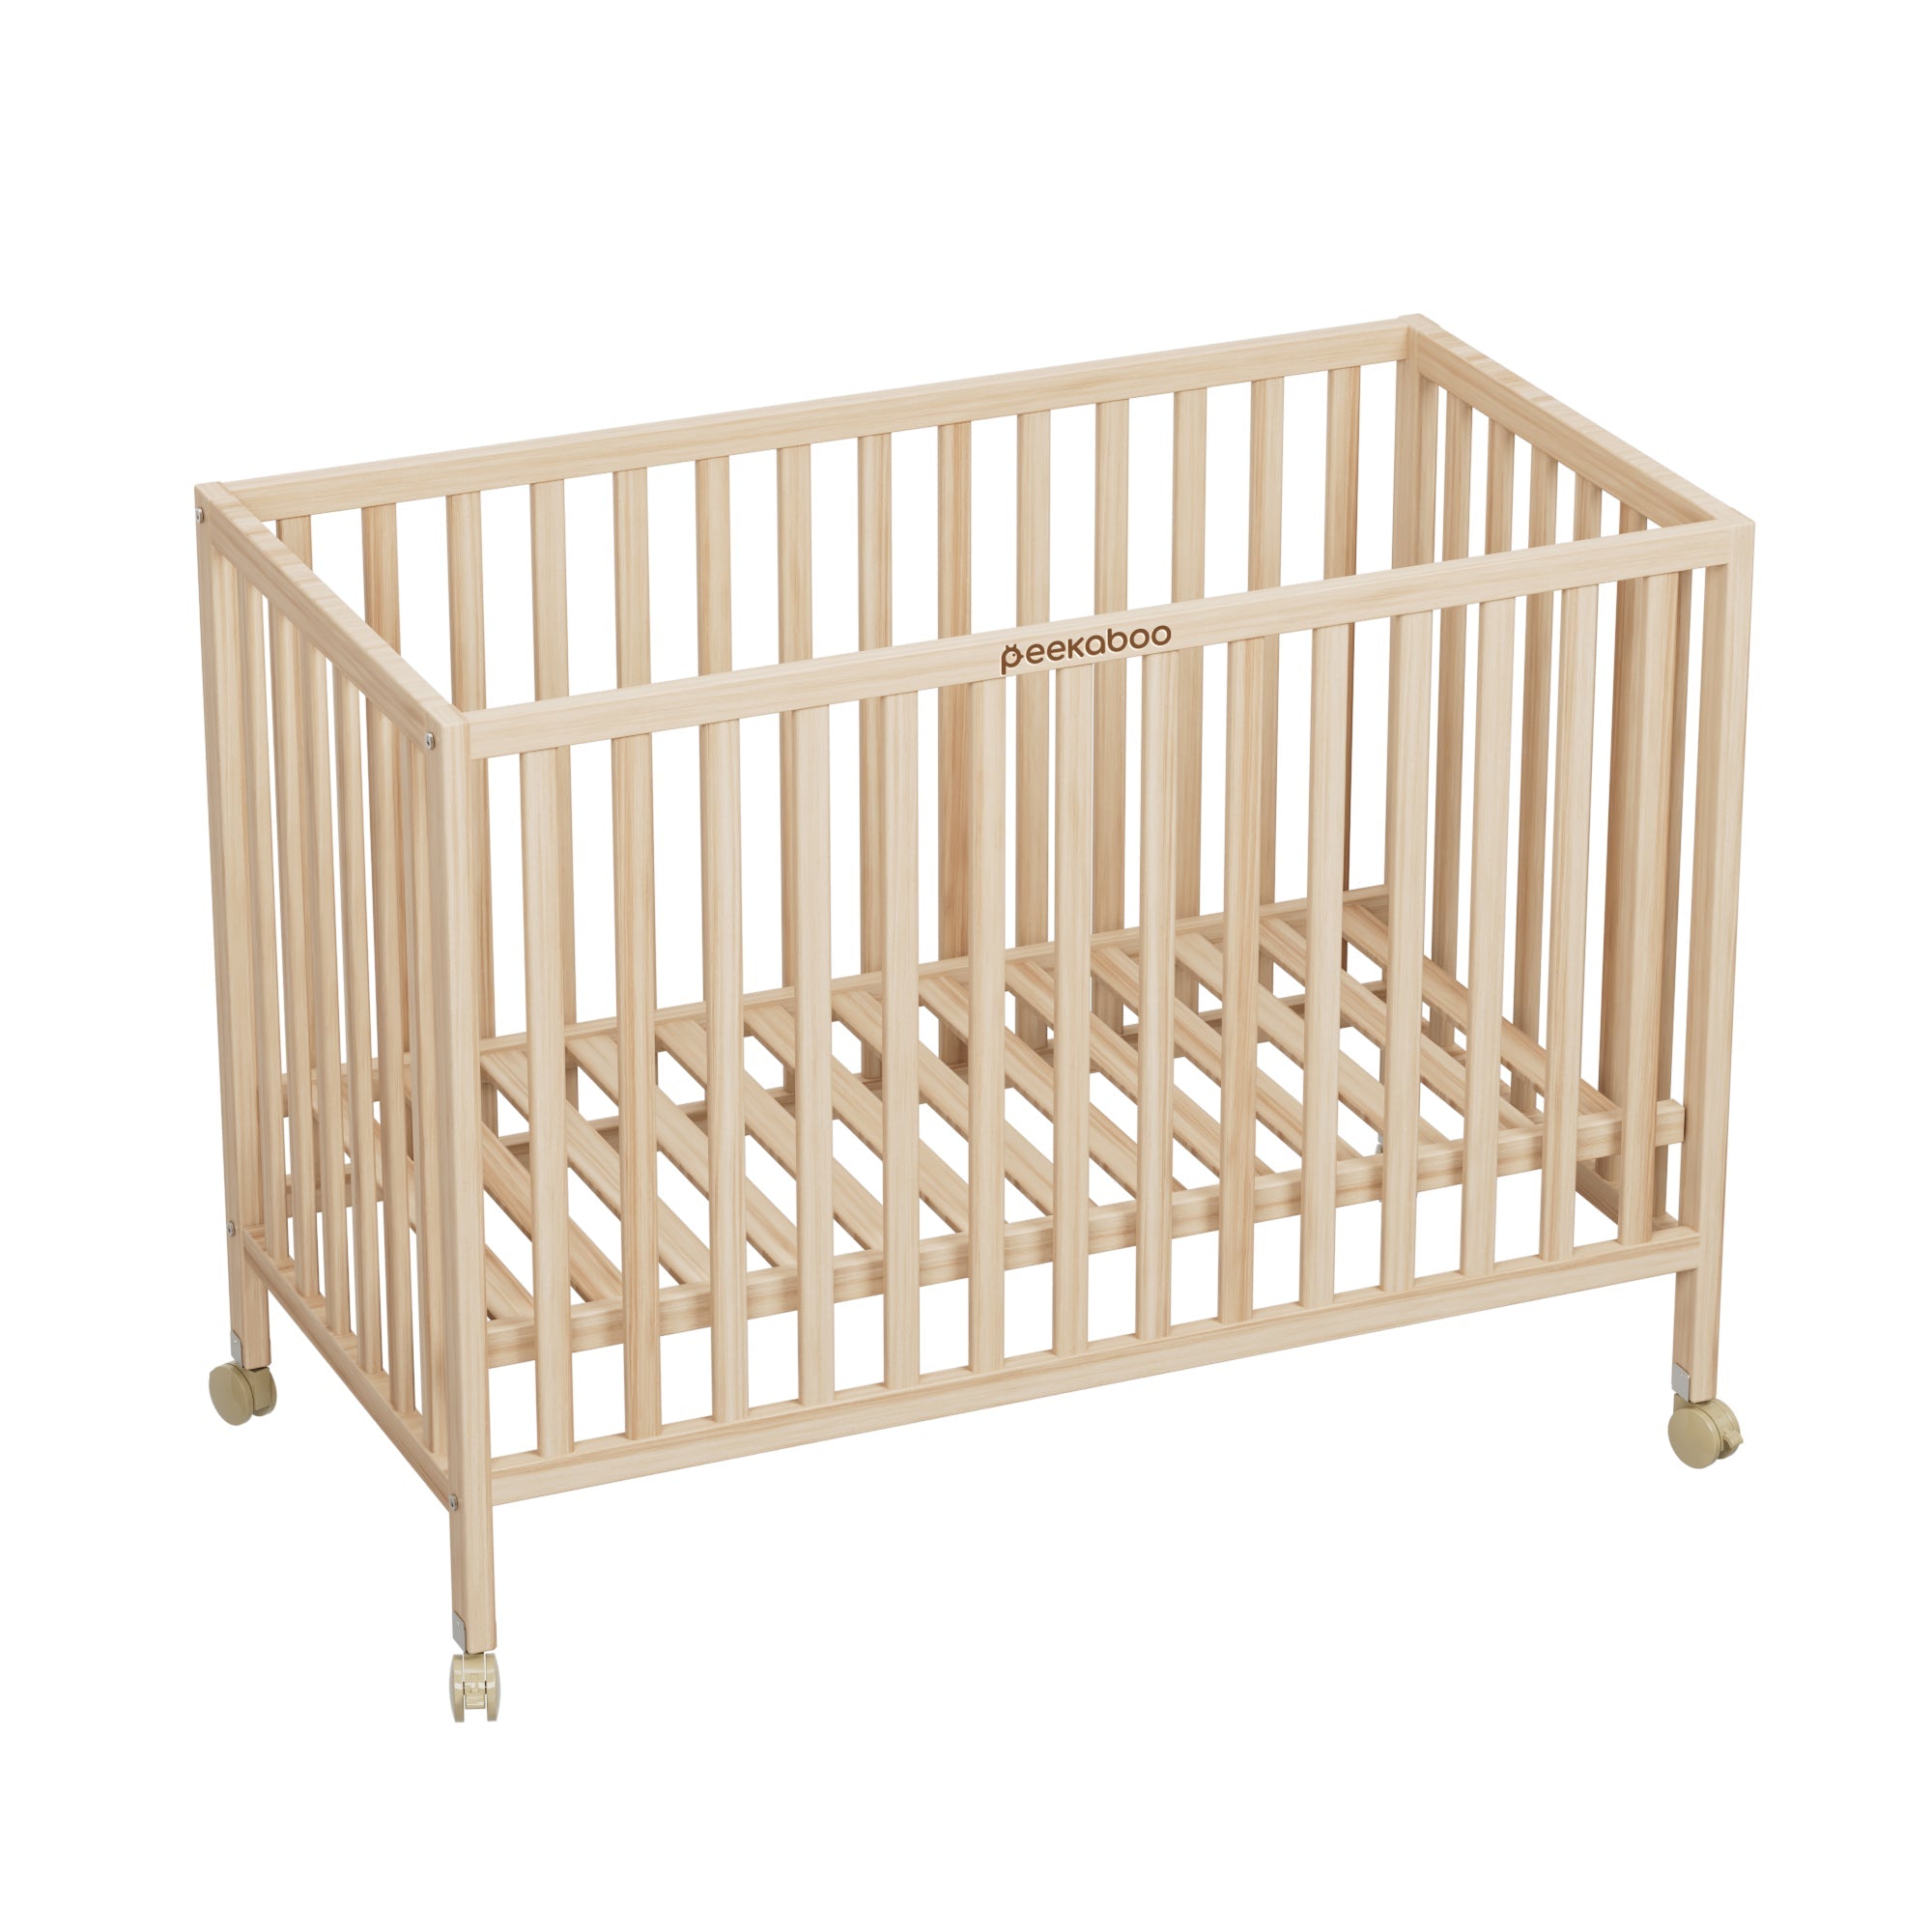 Peekaboo Wooden Cot/ Crib Bed with 3 Level Height Adjustment & Mosquito Net Natural Wood Age- Newborn to 4 Years (Holds upto 50 Kgs)